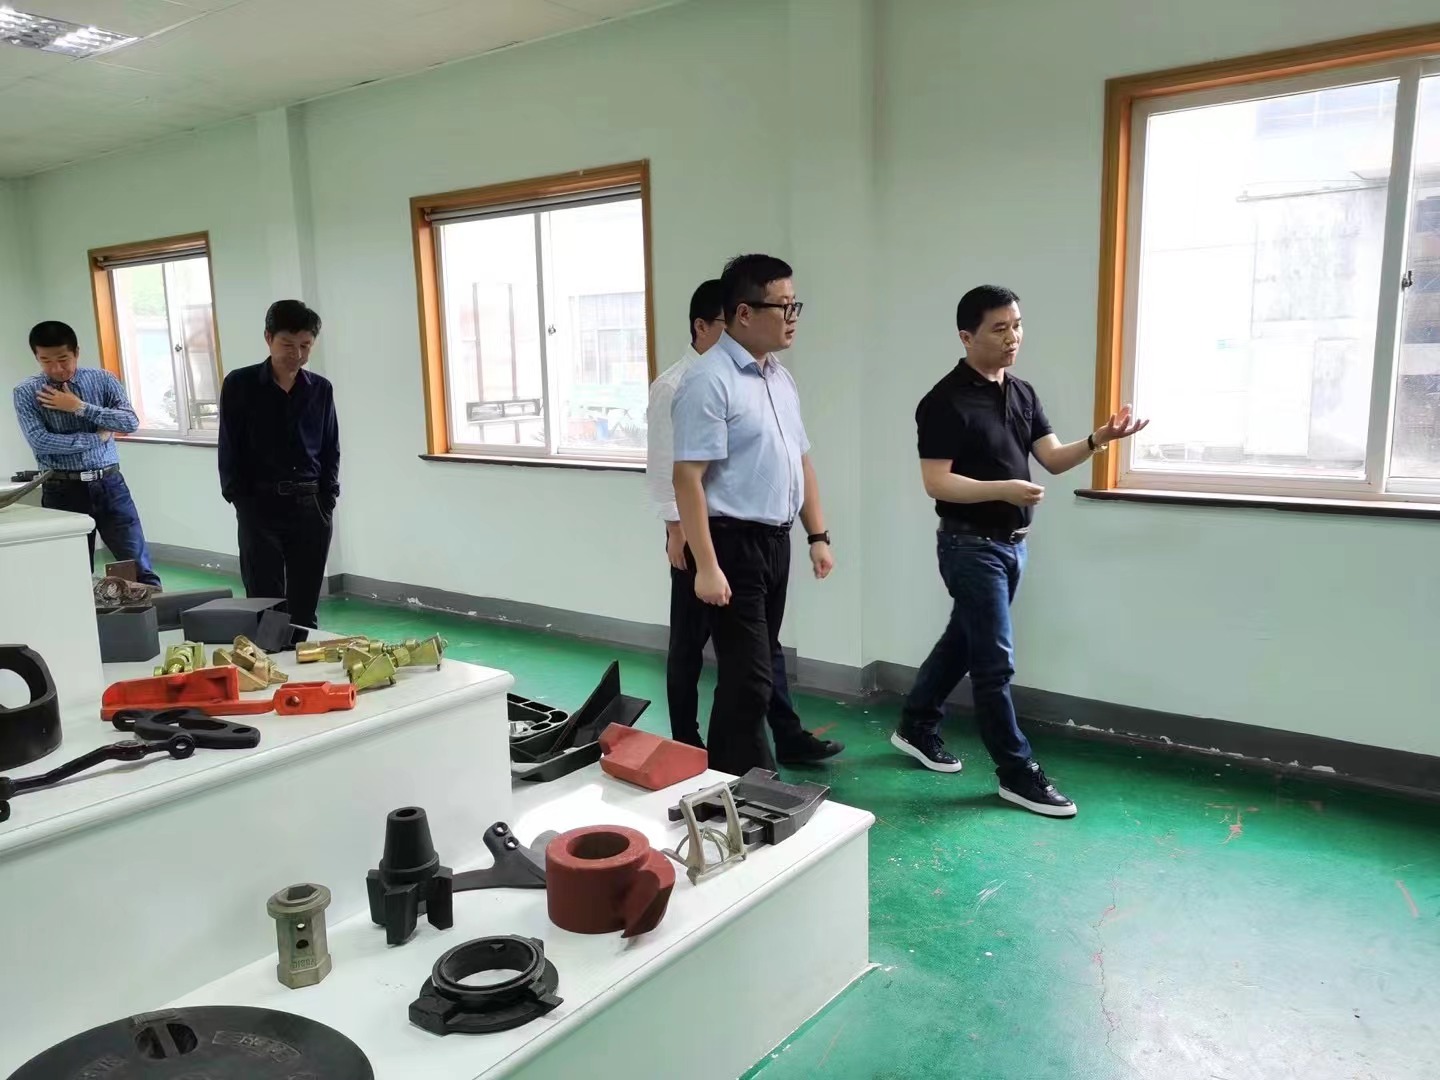 On May 19, 2021, Peidong Wu, deputy head of Fenghua District, investigated Huawei Investment Casting(图1)